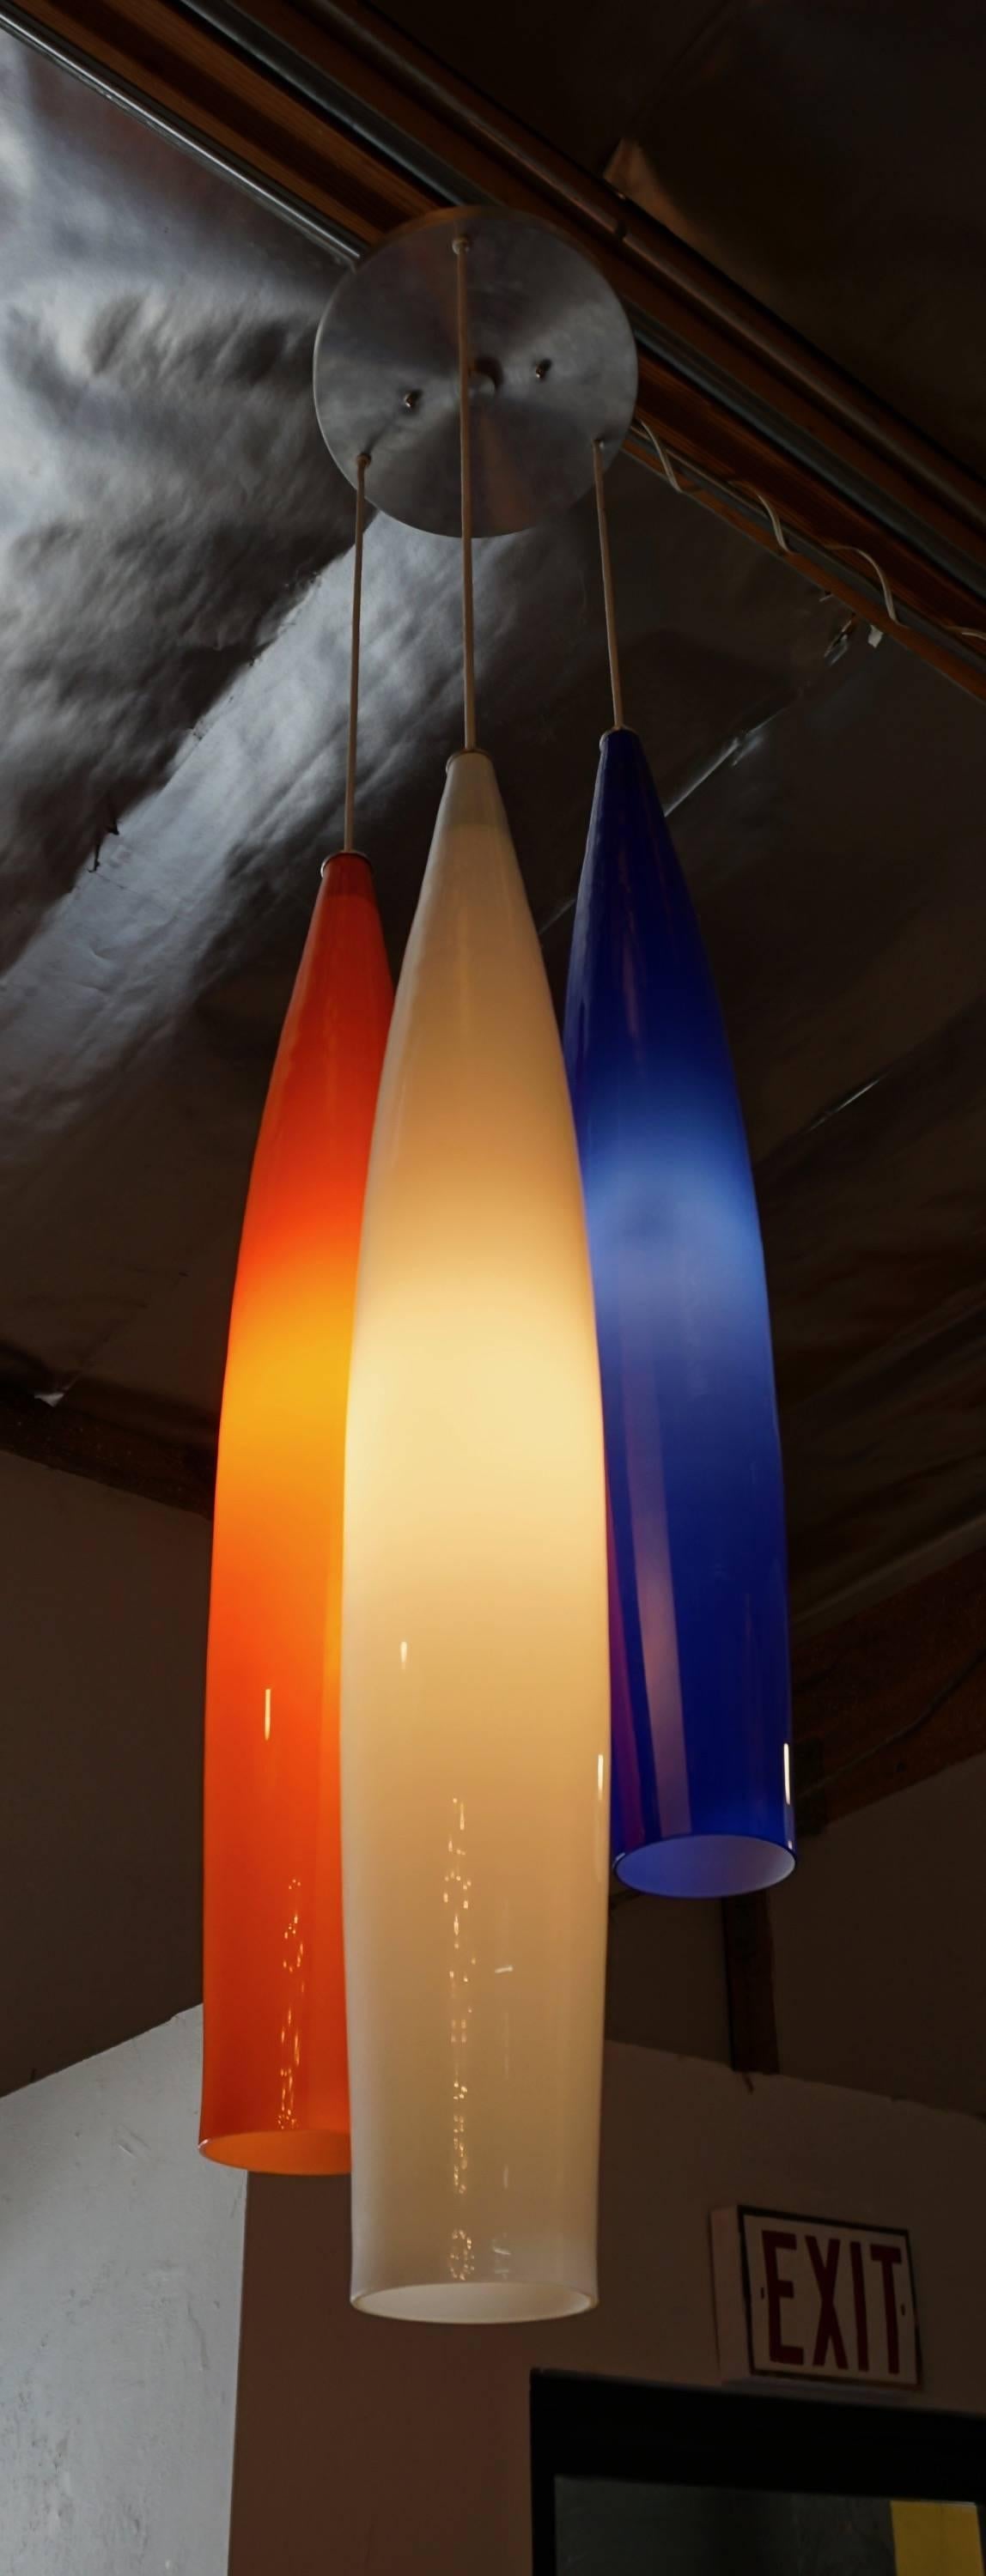 Tricolor handblown glass with opaline interiors by Gino Vistosi, Murano, Italy, mounted to a brushed stainless steel ceiling cap. Excellent condition with no chips or cracks.